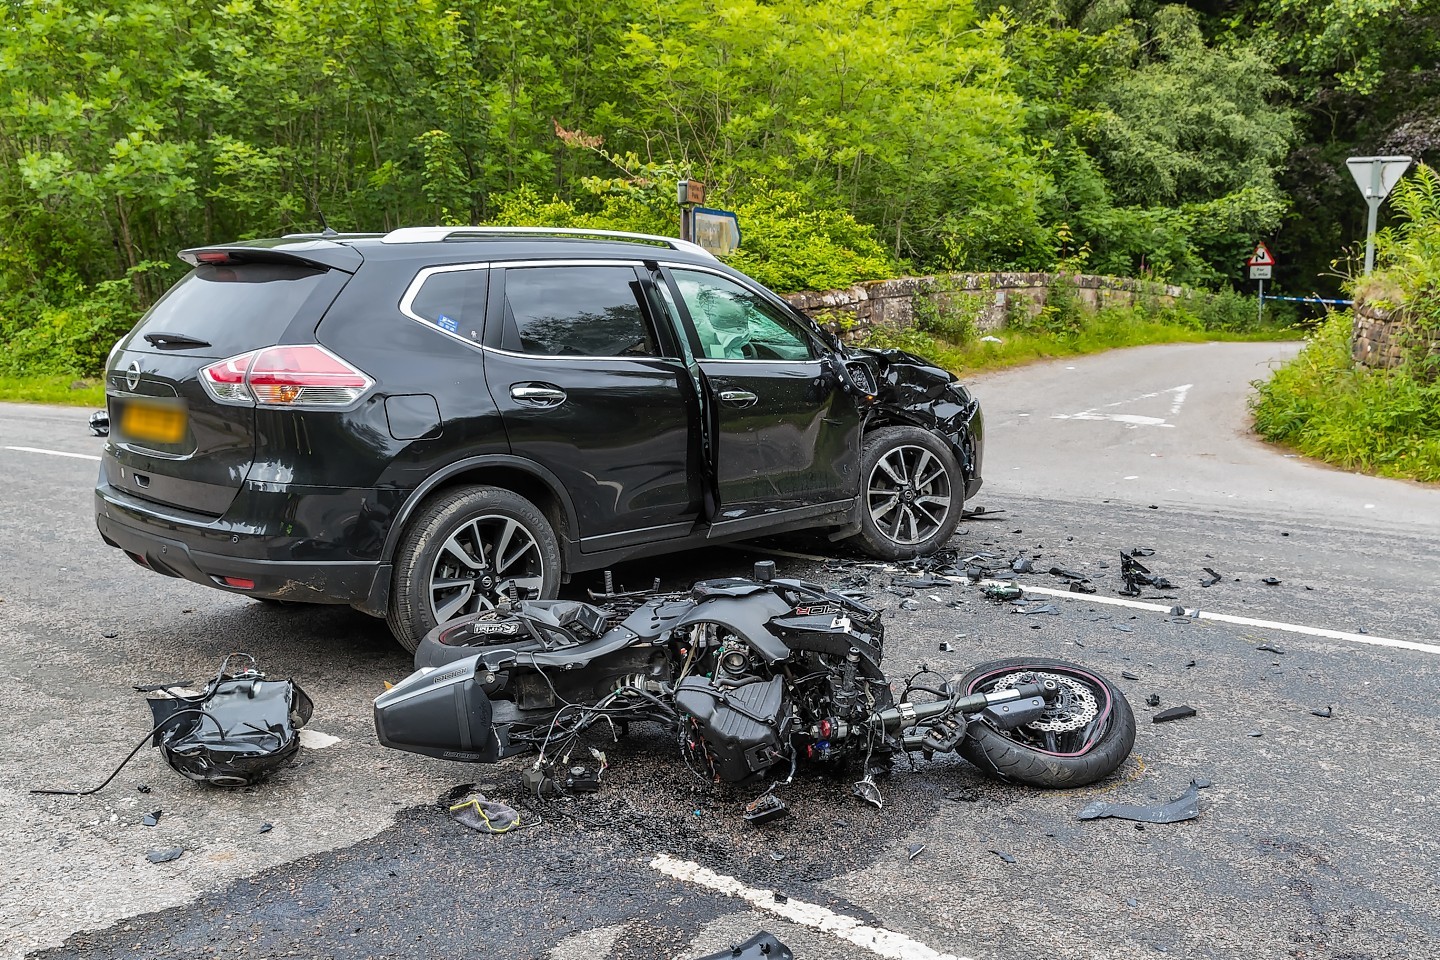 This is the scene of the crash on the A862.